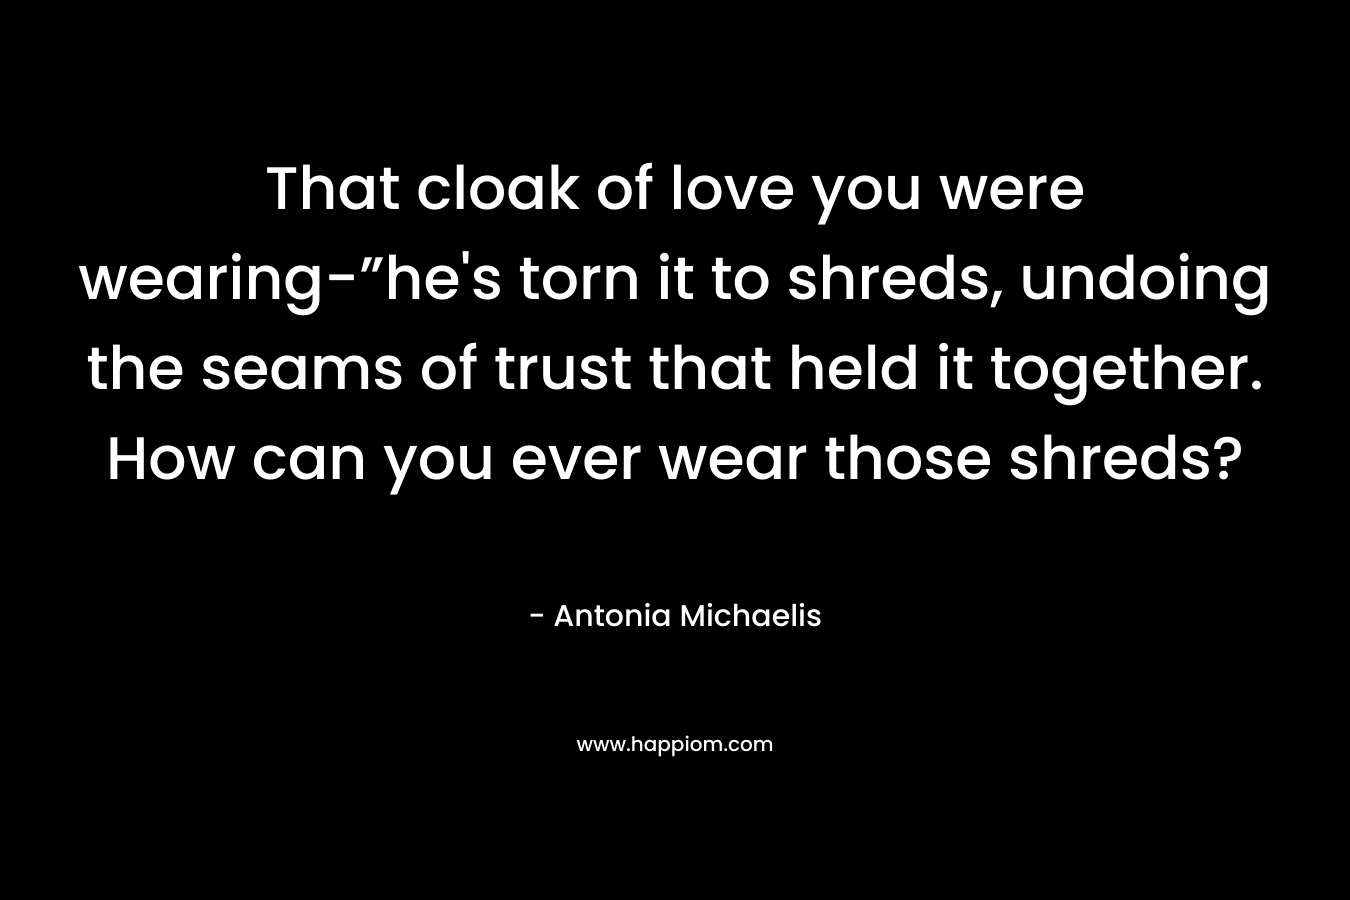 That cloak of love you were wearing-”he’s torn it to shreds, undoing the seams of trust that held it together. How can you ever wear those shreds? – Antonia Michaelis